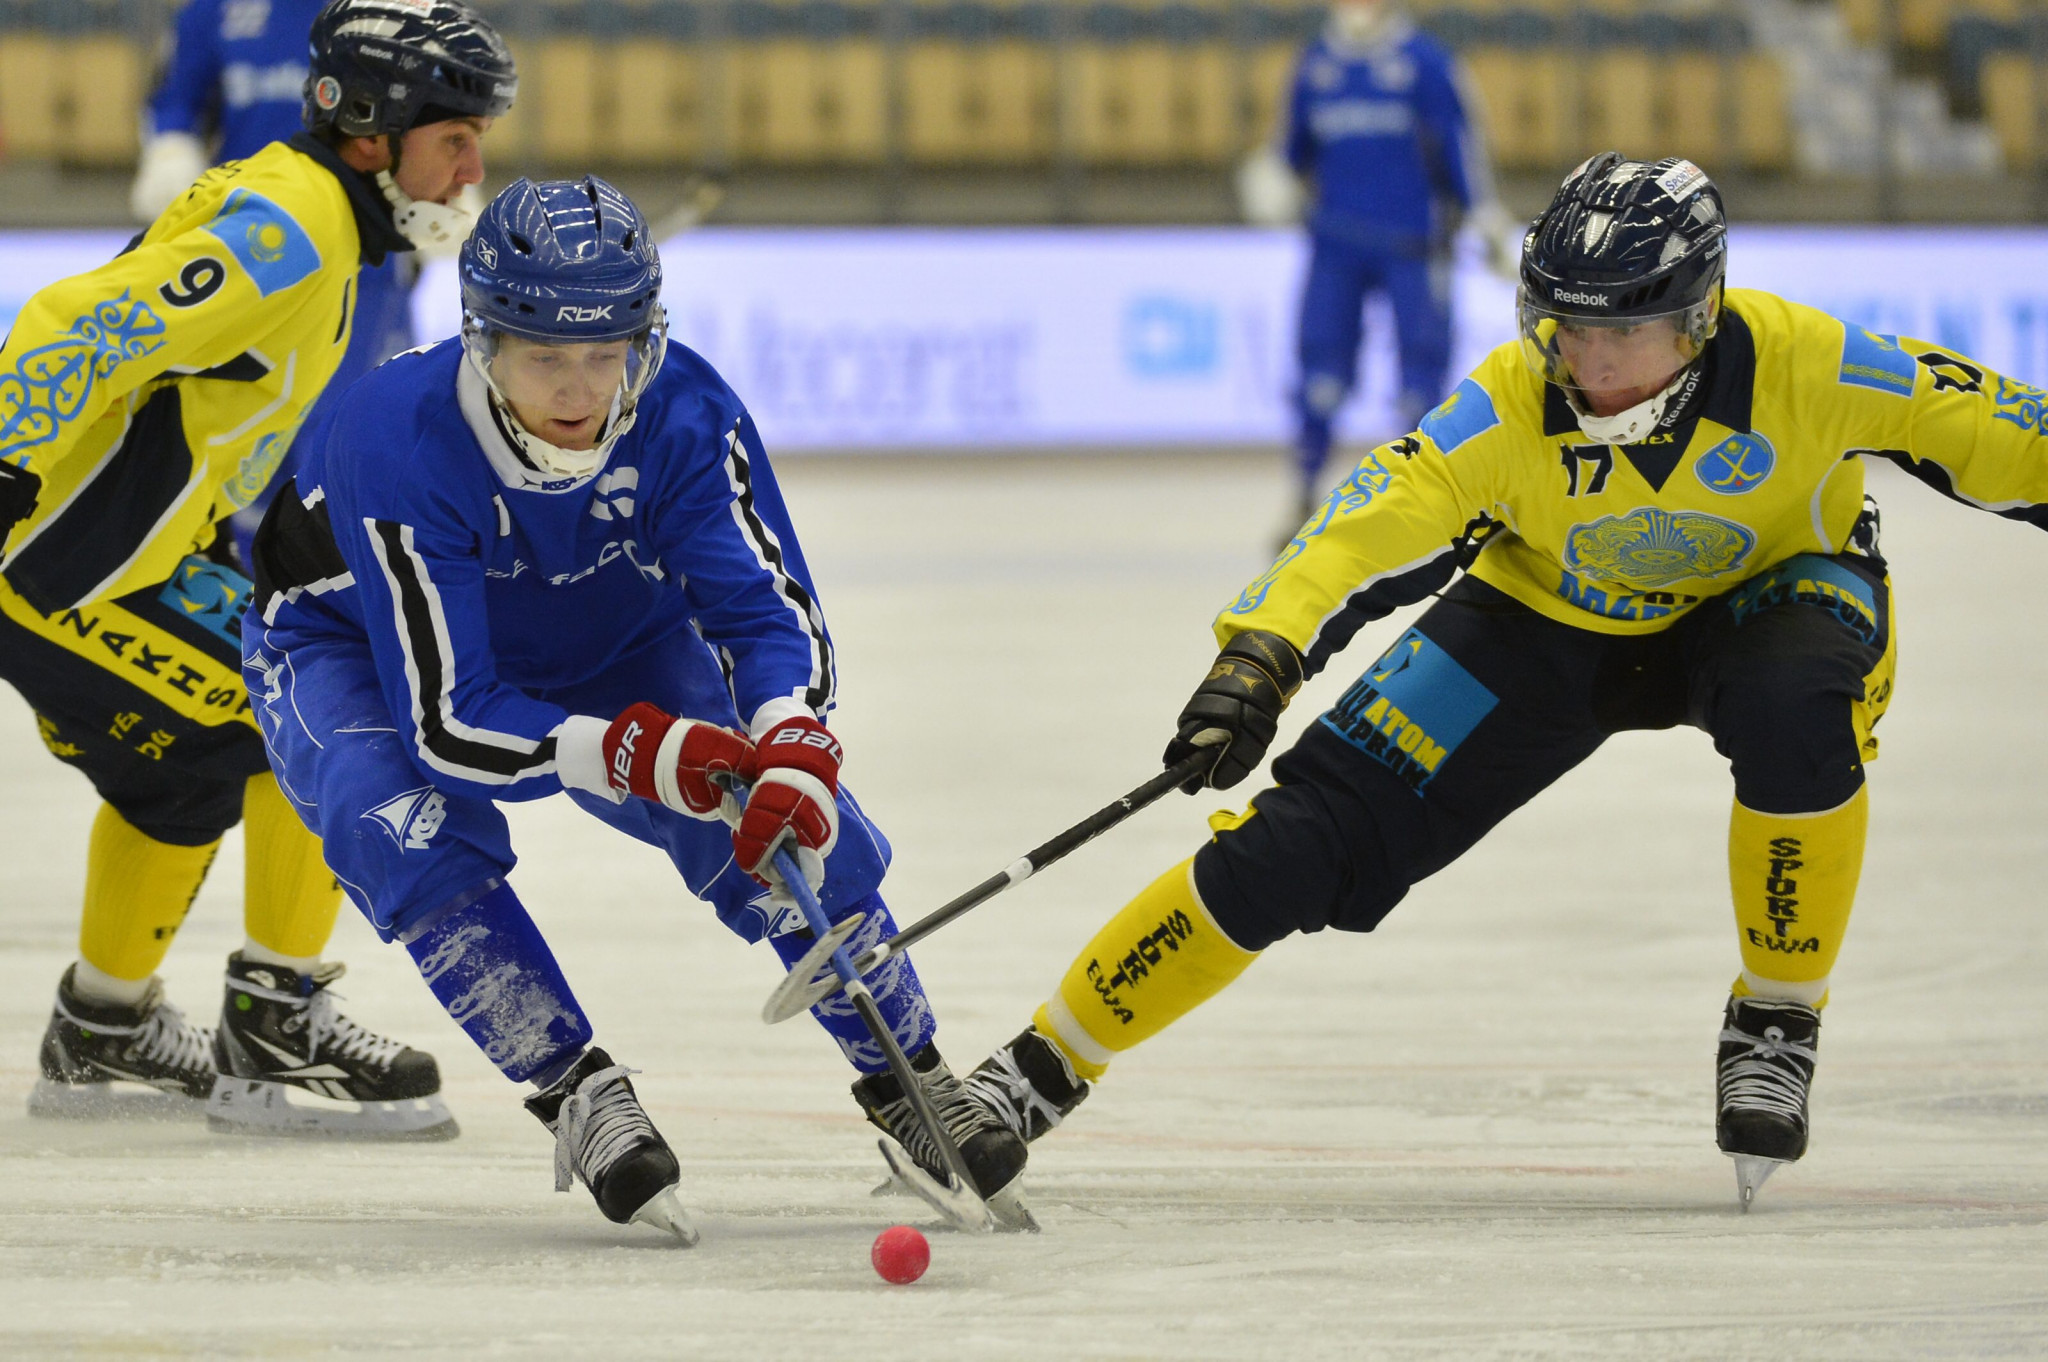 Markus Kumpuoja, pictured in blue at the 2013 World Championship, scored five goals in Finland's quarter-final ©Getty Images